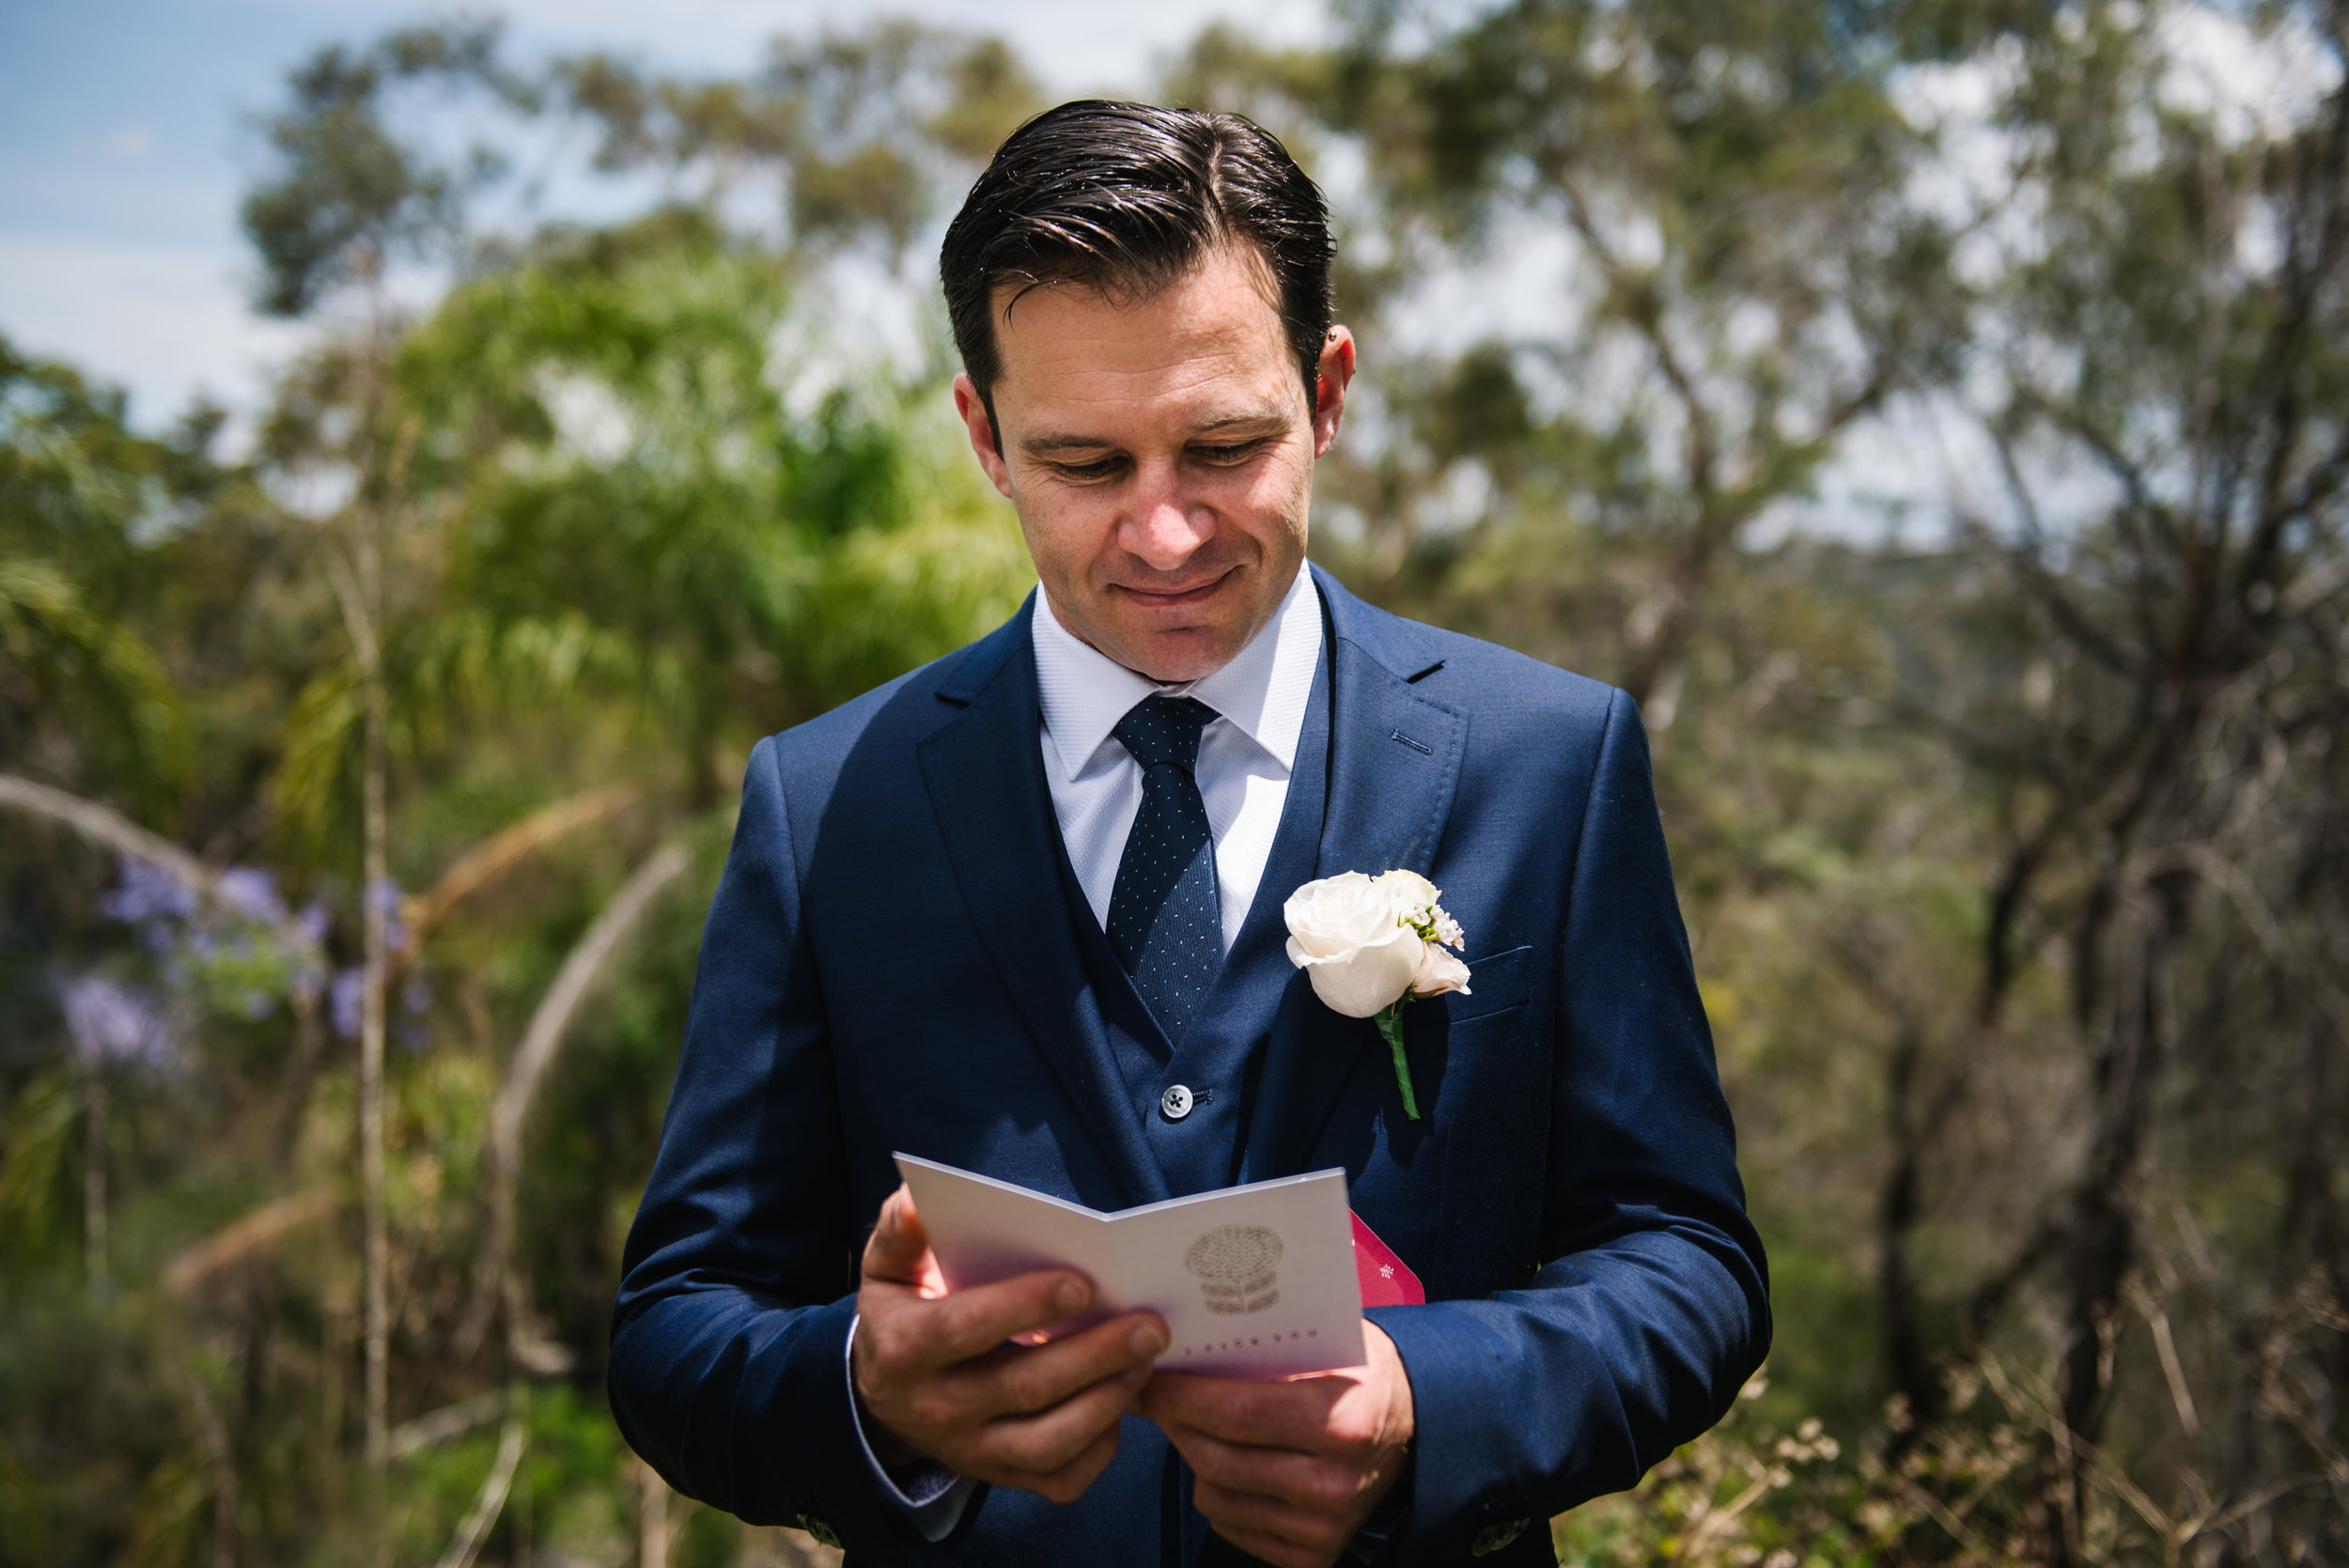 Groom reading card from bride on wedding day